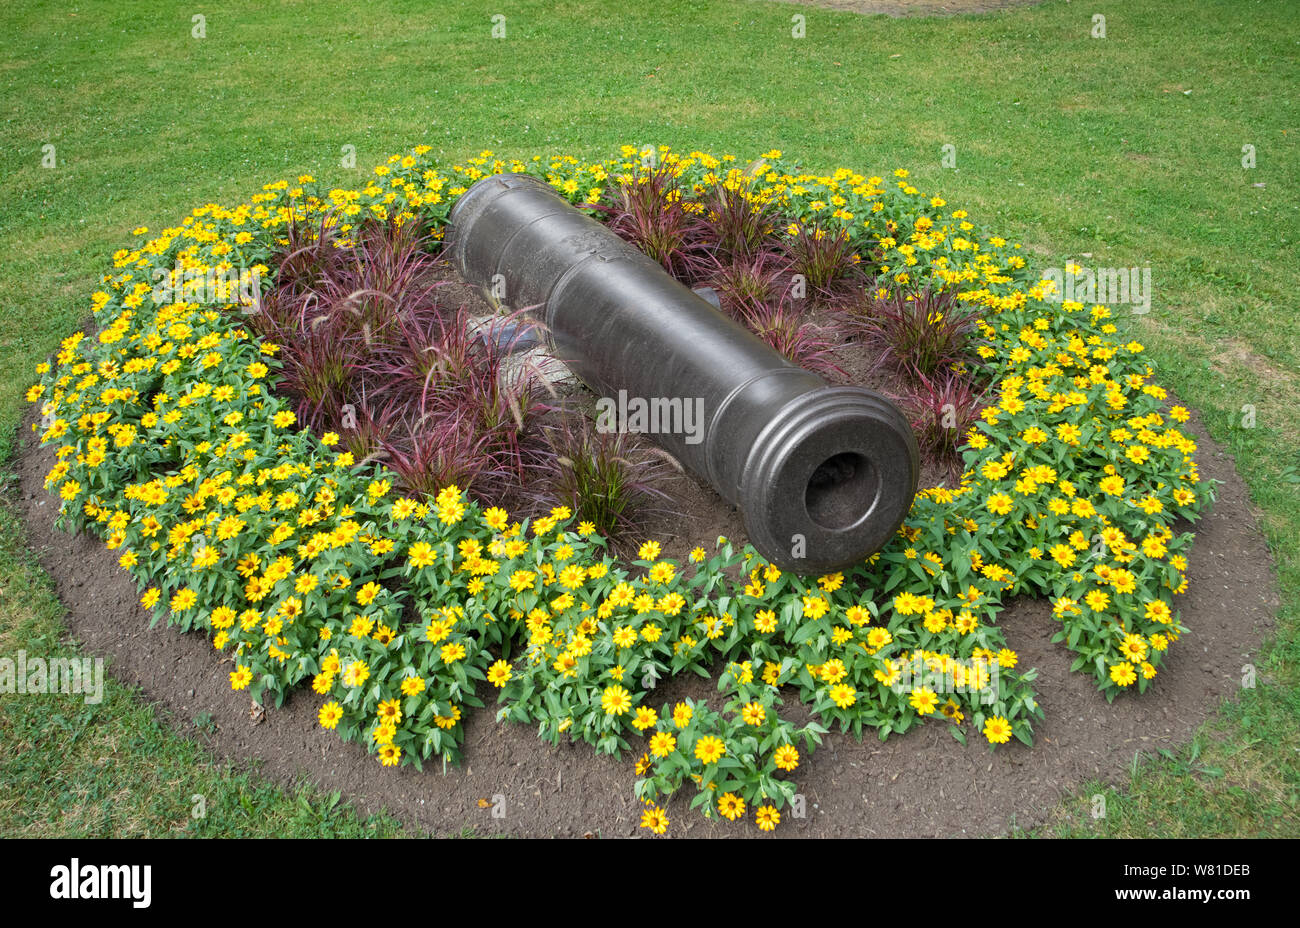 A old British cannon in Stratford's Queen's Park.. Stock Photo